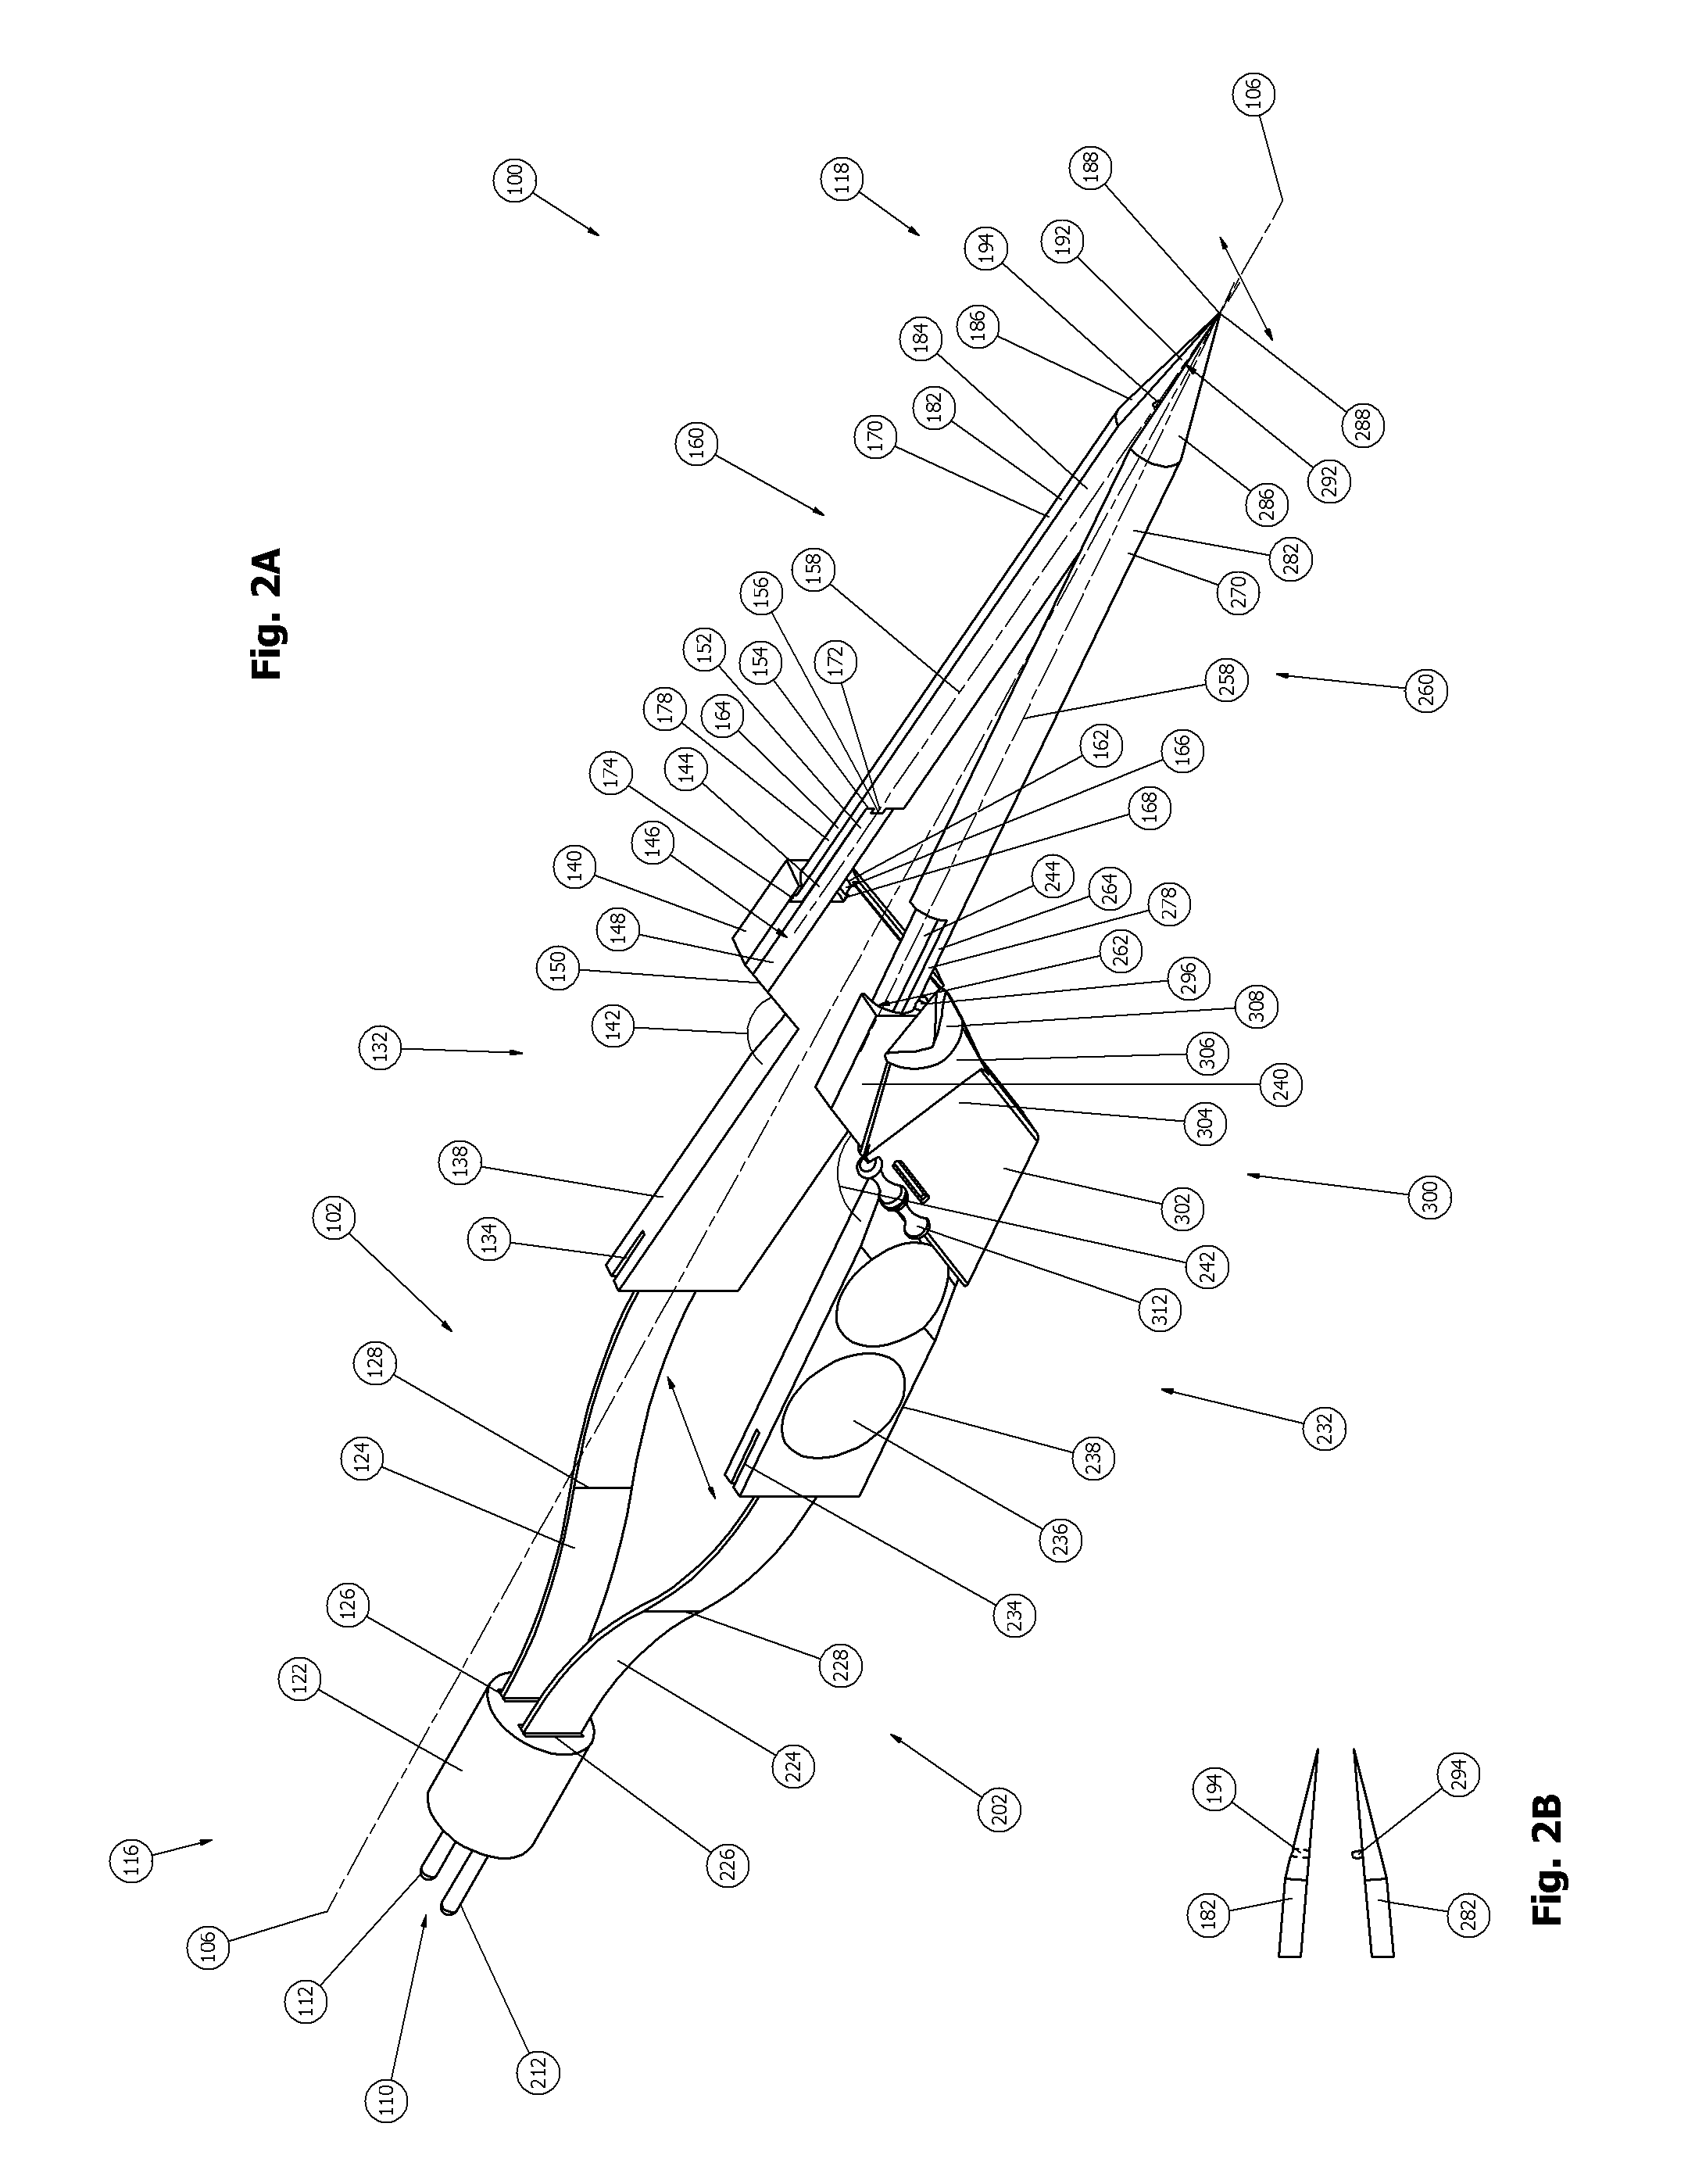 Surgical multi-tool and method of use